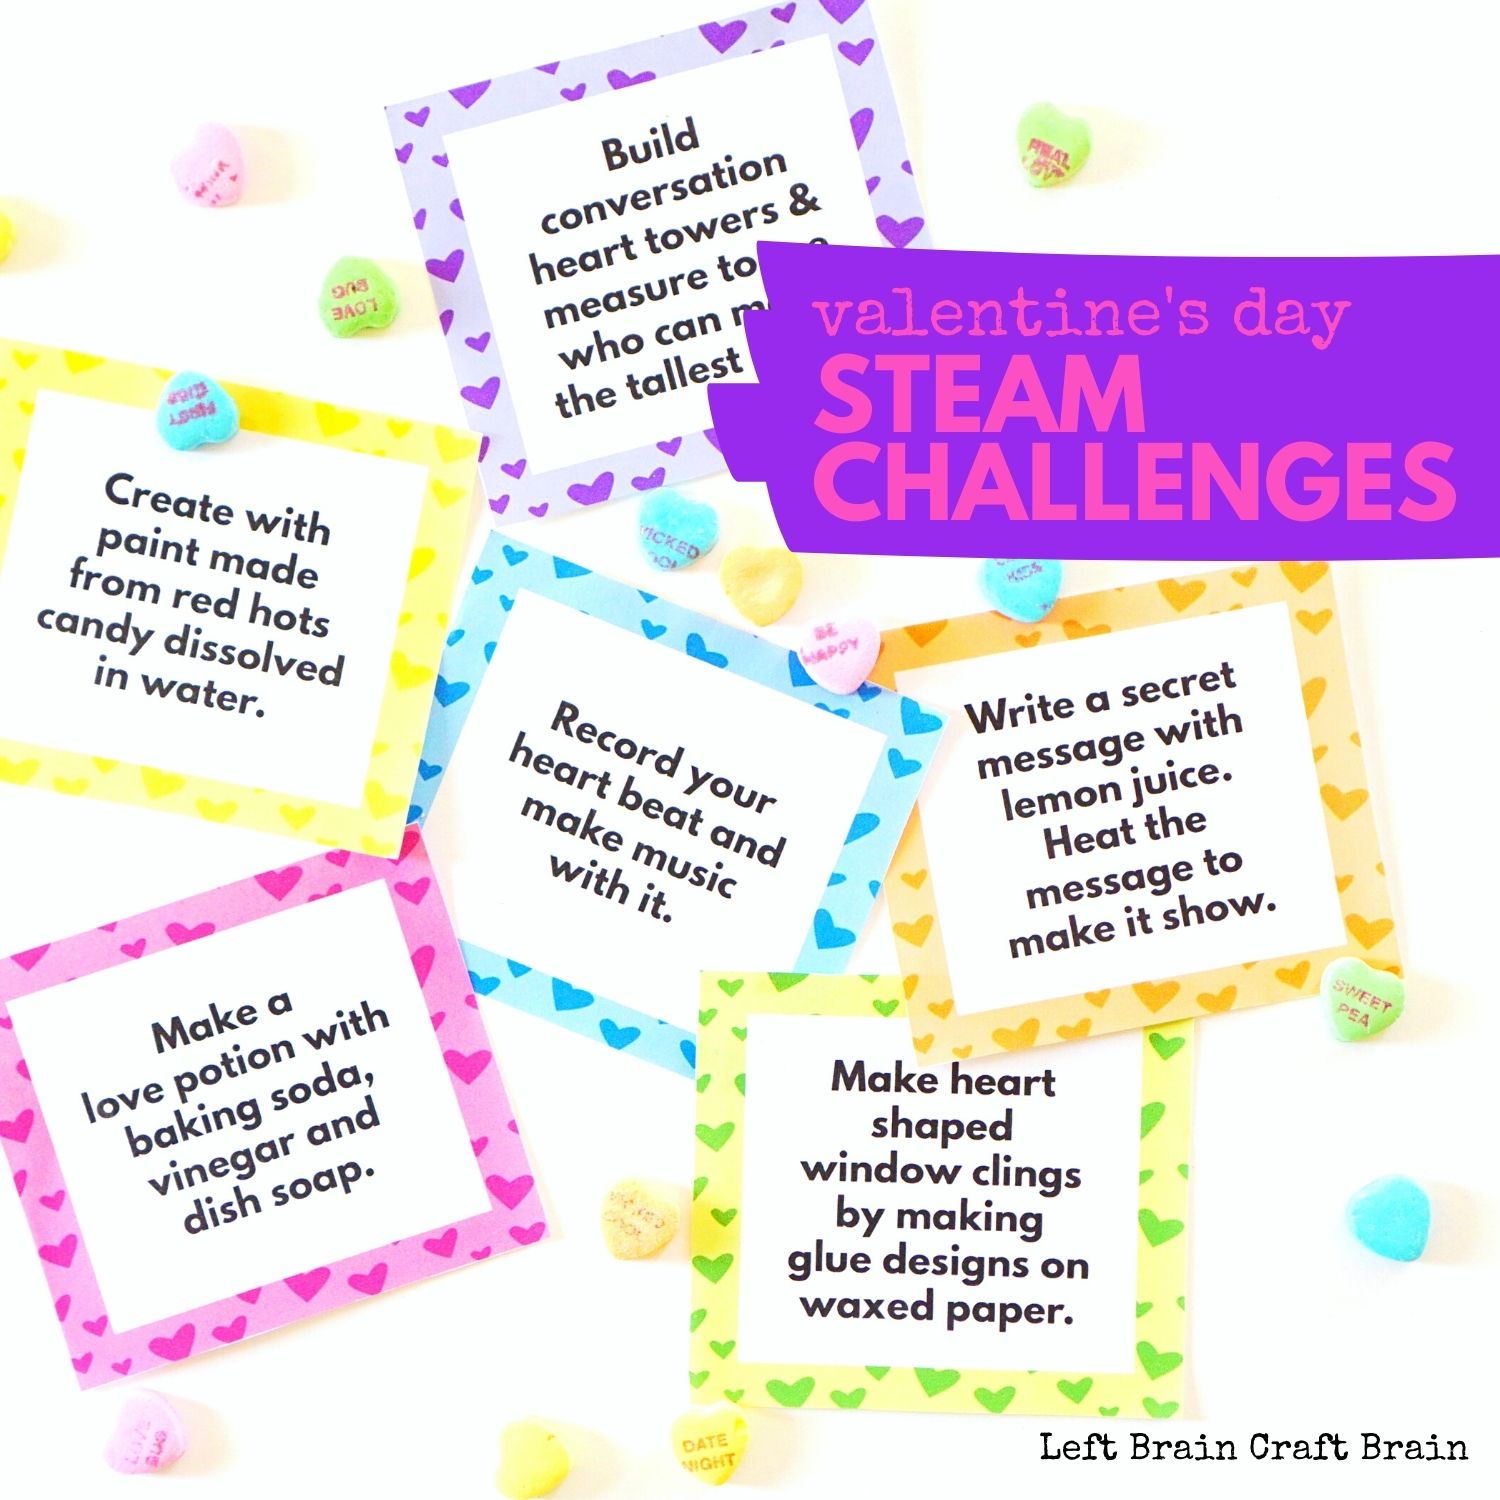 Have some fun with sweet science, technology, engineering, art and math activities this February with these Valentine's Day STEAM Challenge Cards.